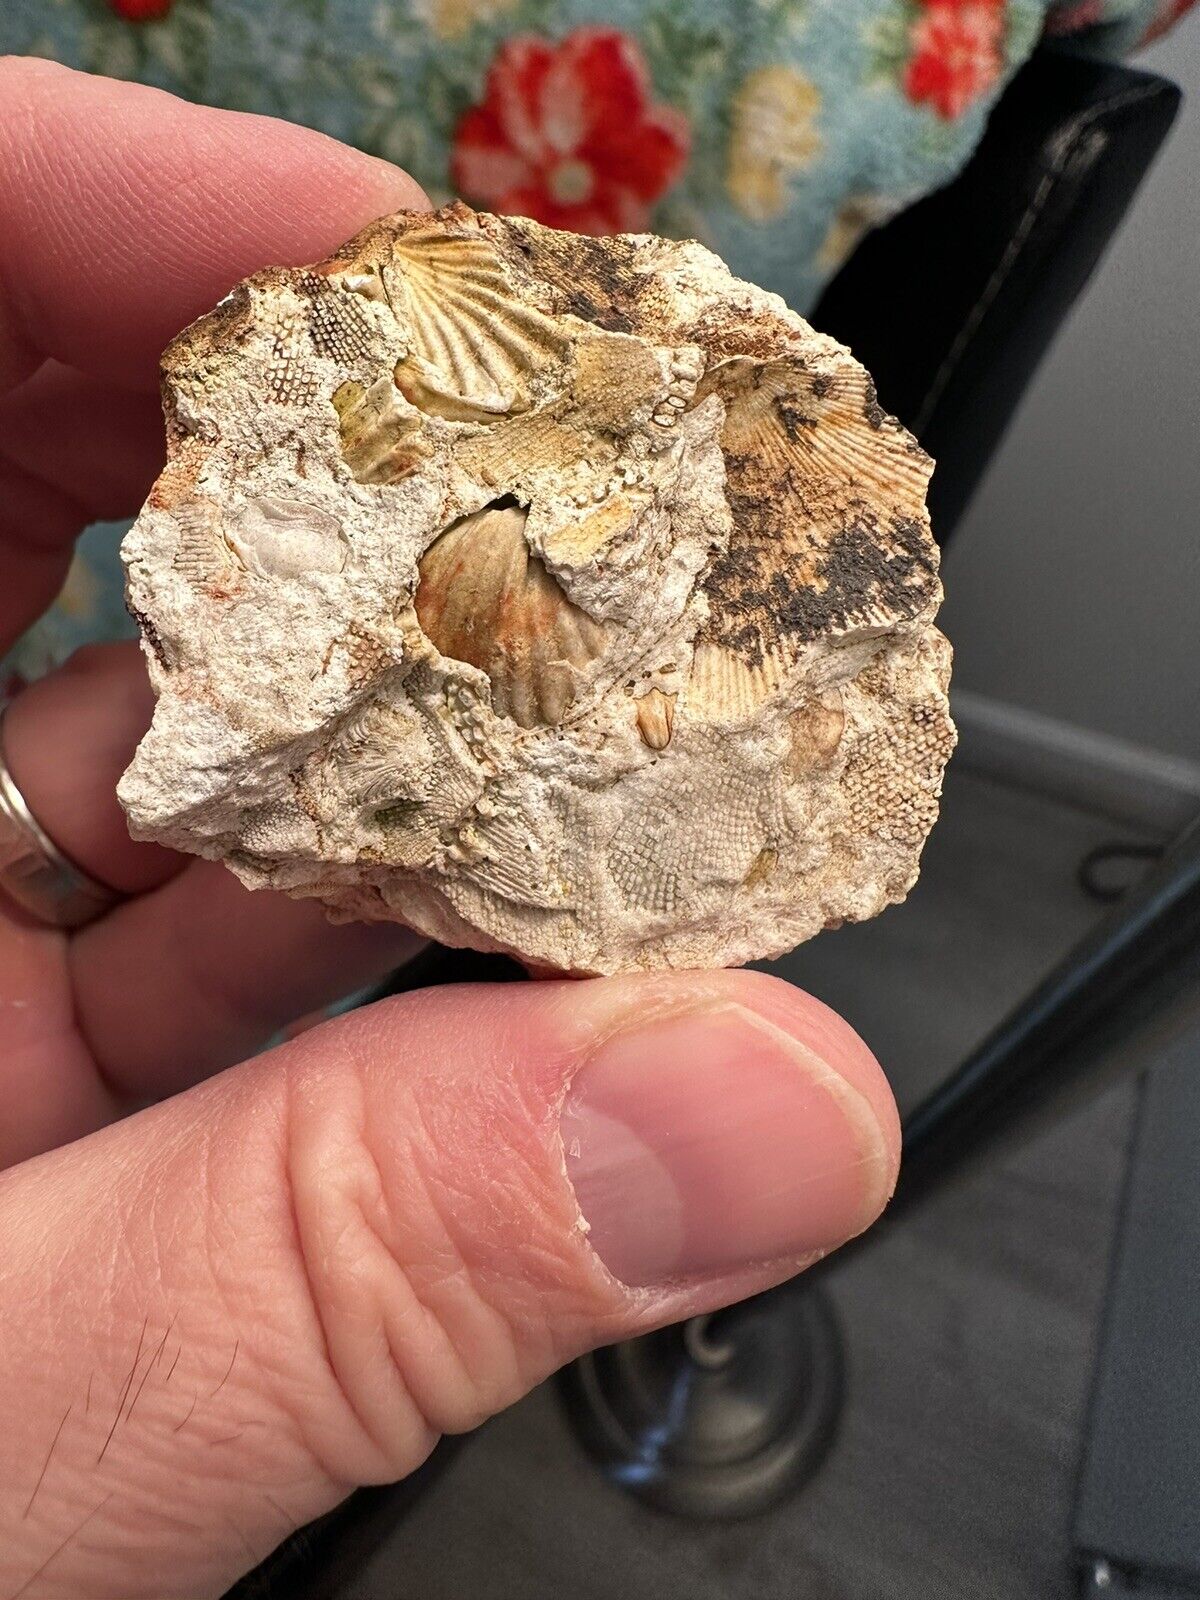 300-400 million year old fossil from Kentucky sea bed shells and sponge